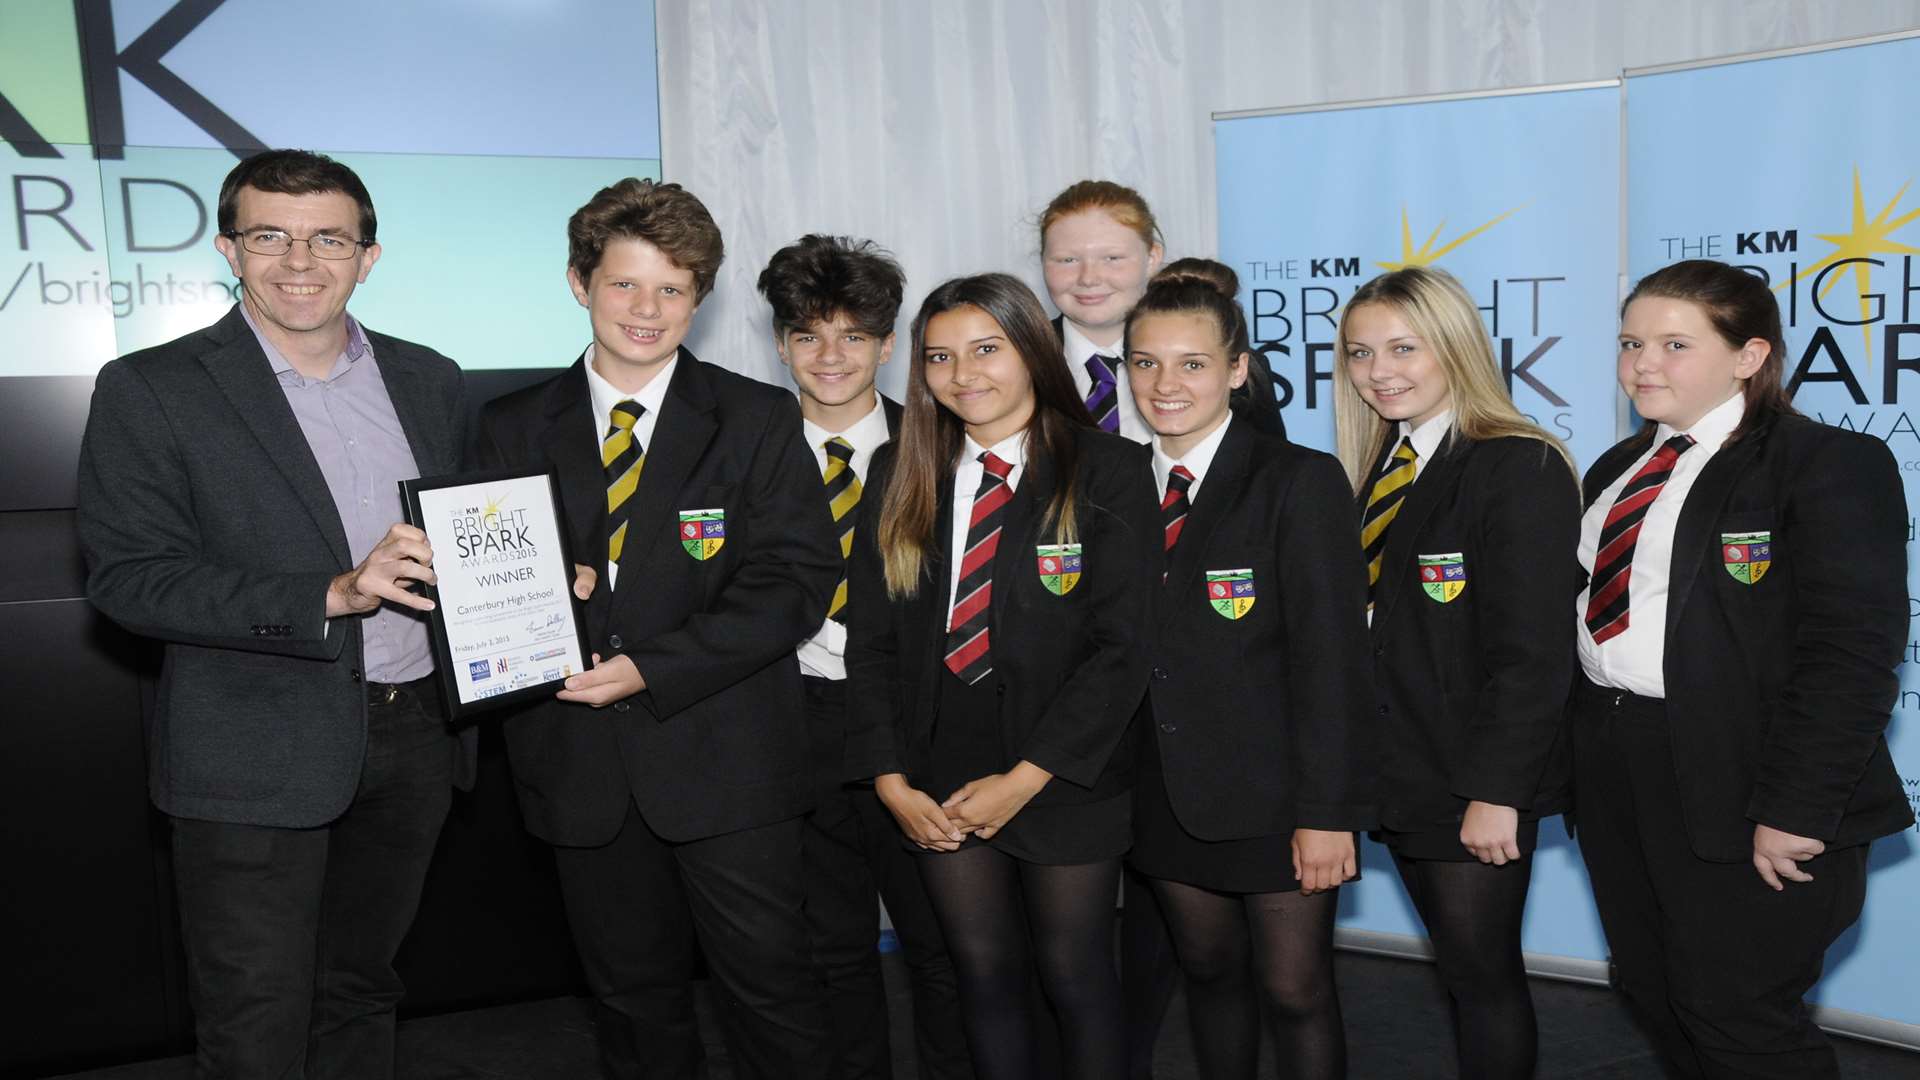 The Canterbury Academy team were congratulated by Paul Gannaway from Betteridge and Milsom at the KM Bright Spark Awards 2015.